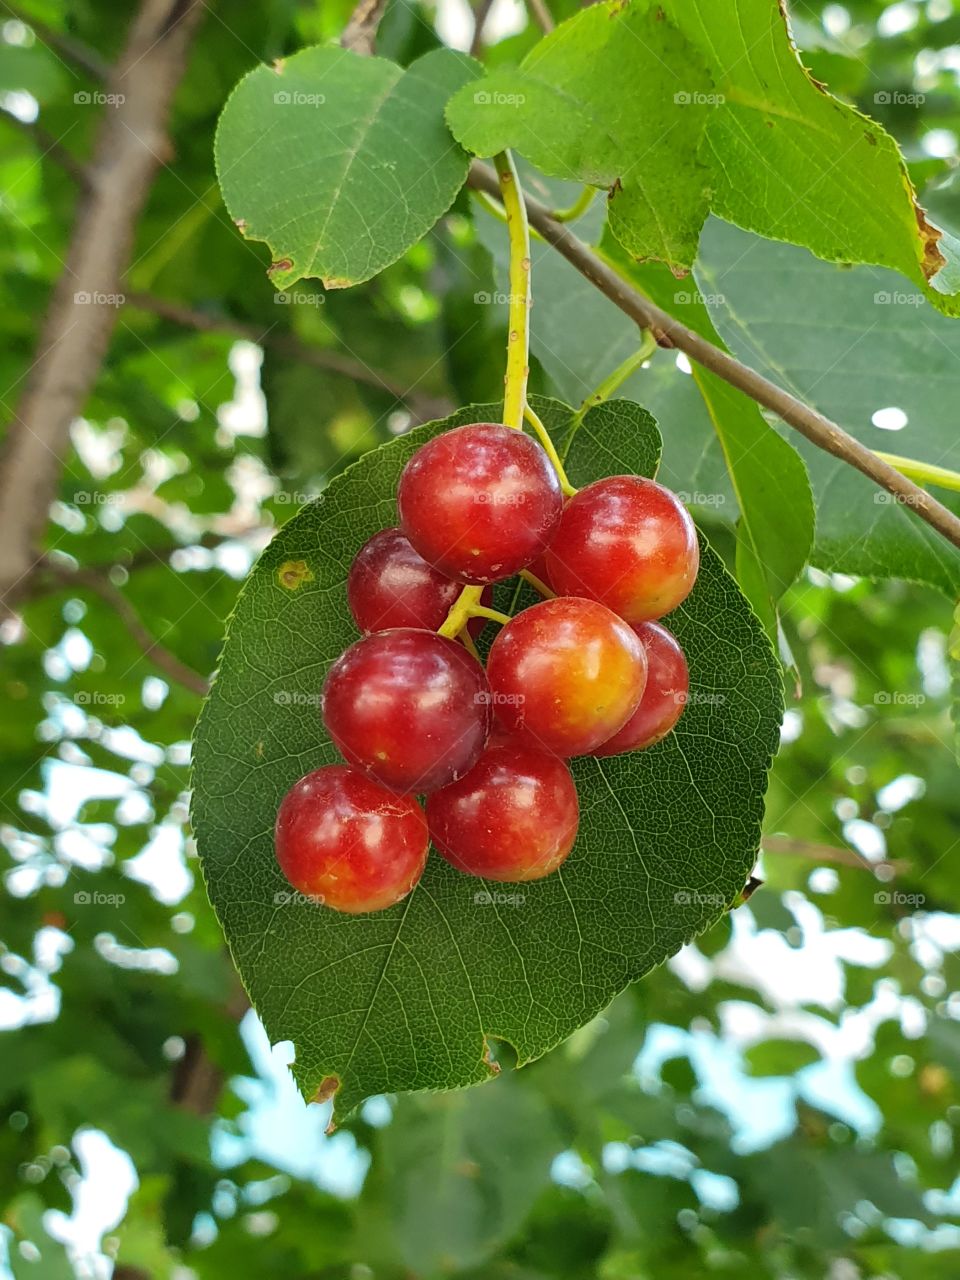 red and yellow kalina berries in front of a leaf